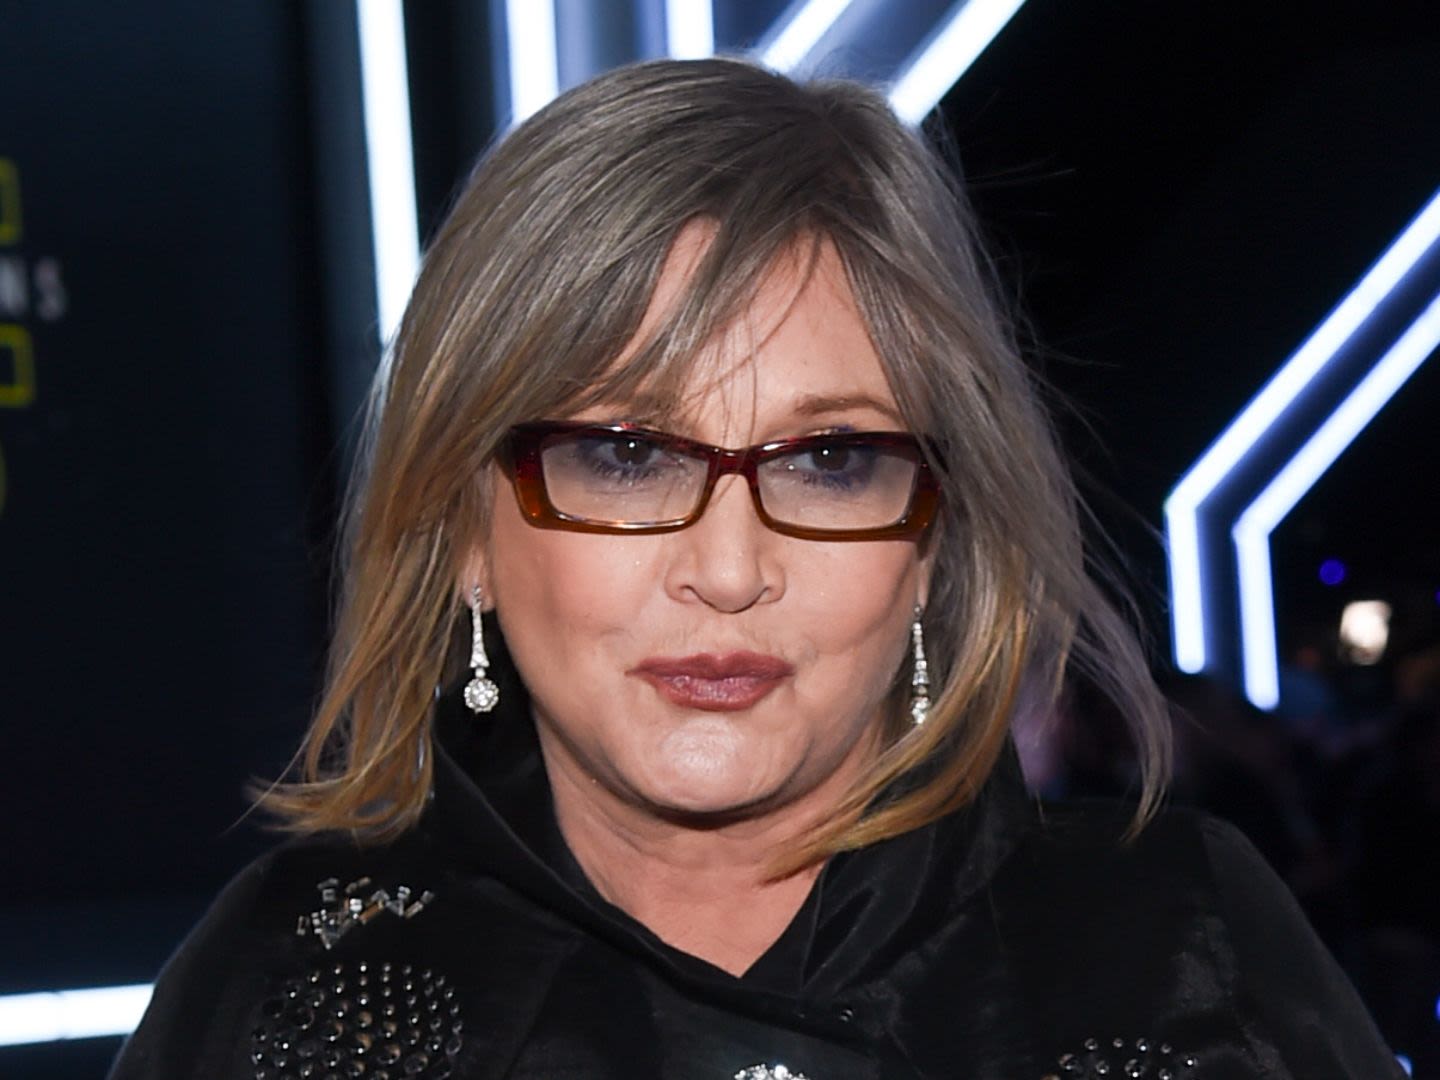 Carrie Fisher Felt 'Pressure To Be Thin' Before Death, Showing Just How Destructive Weight Stigma Really Is